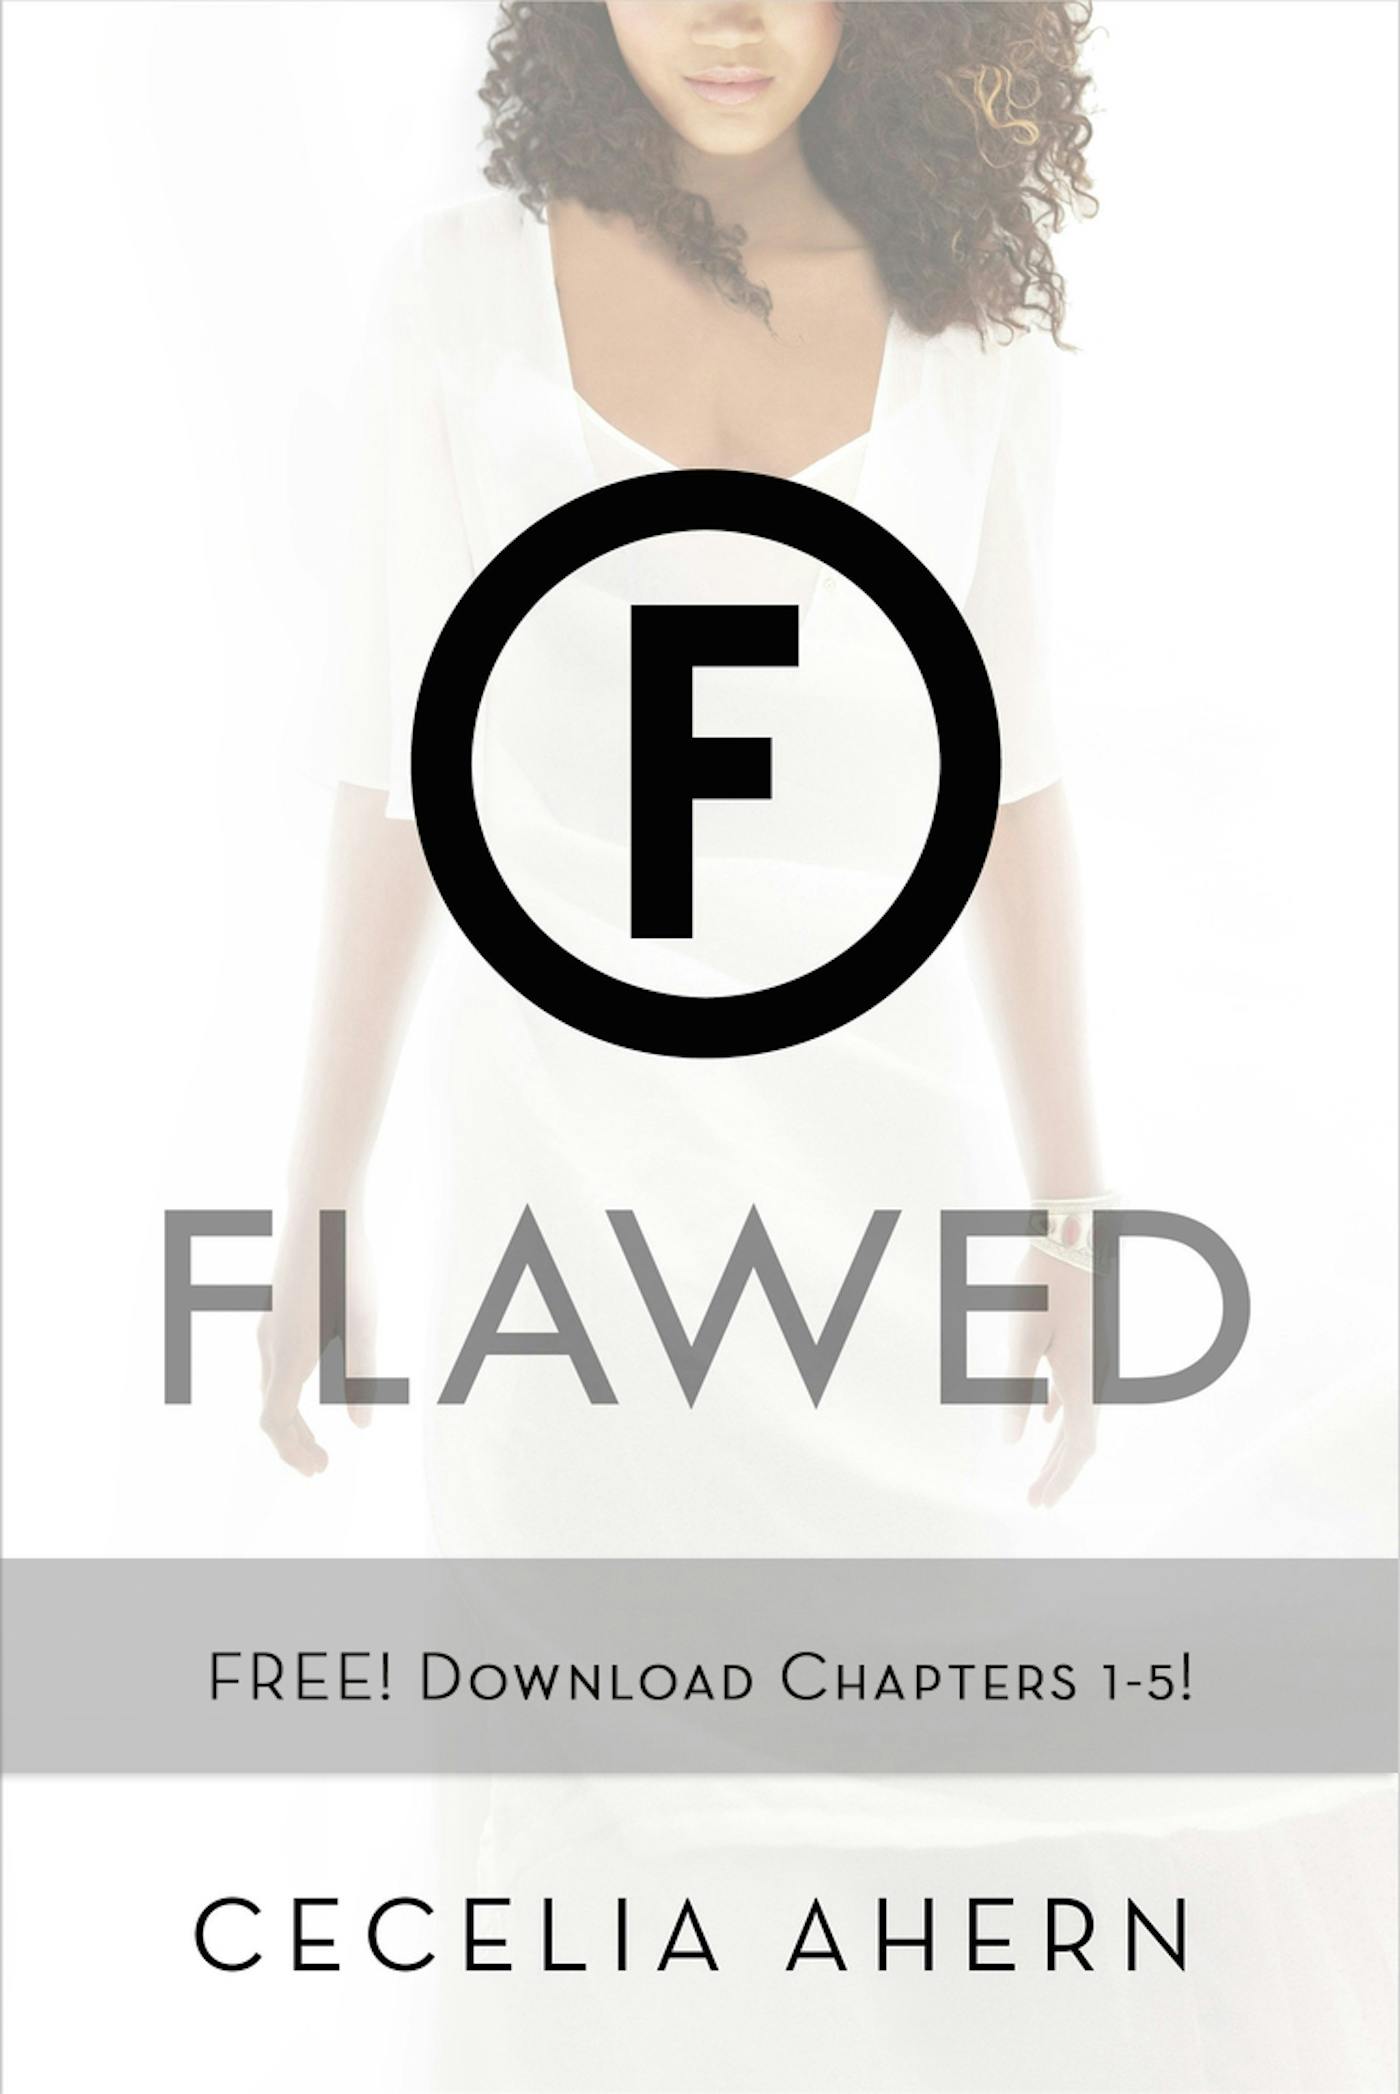 Flawed Chapters 1-5